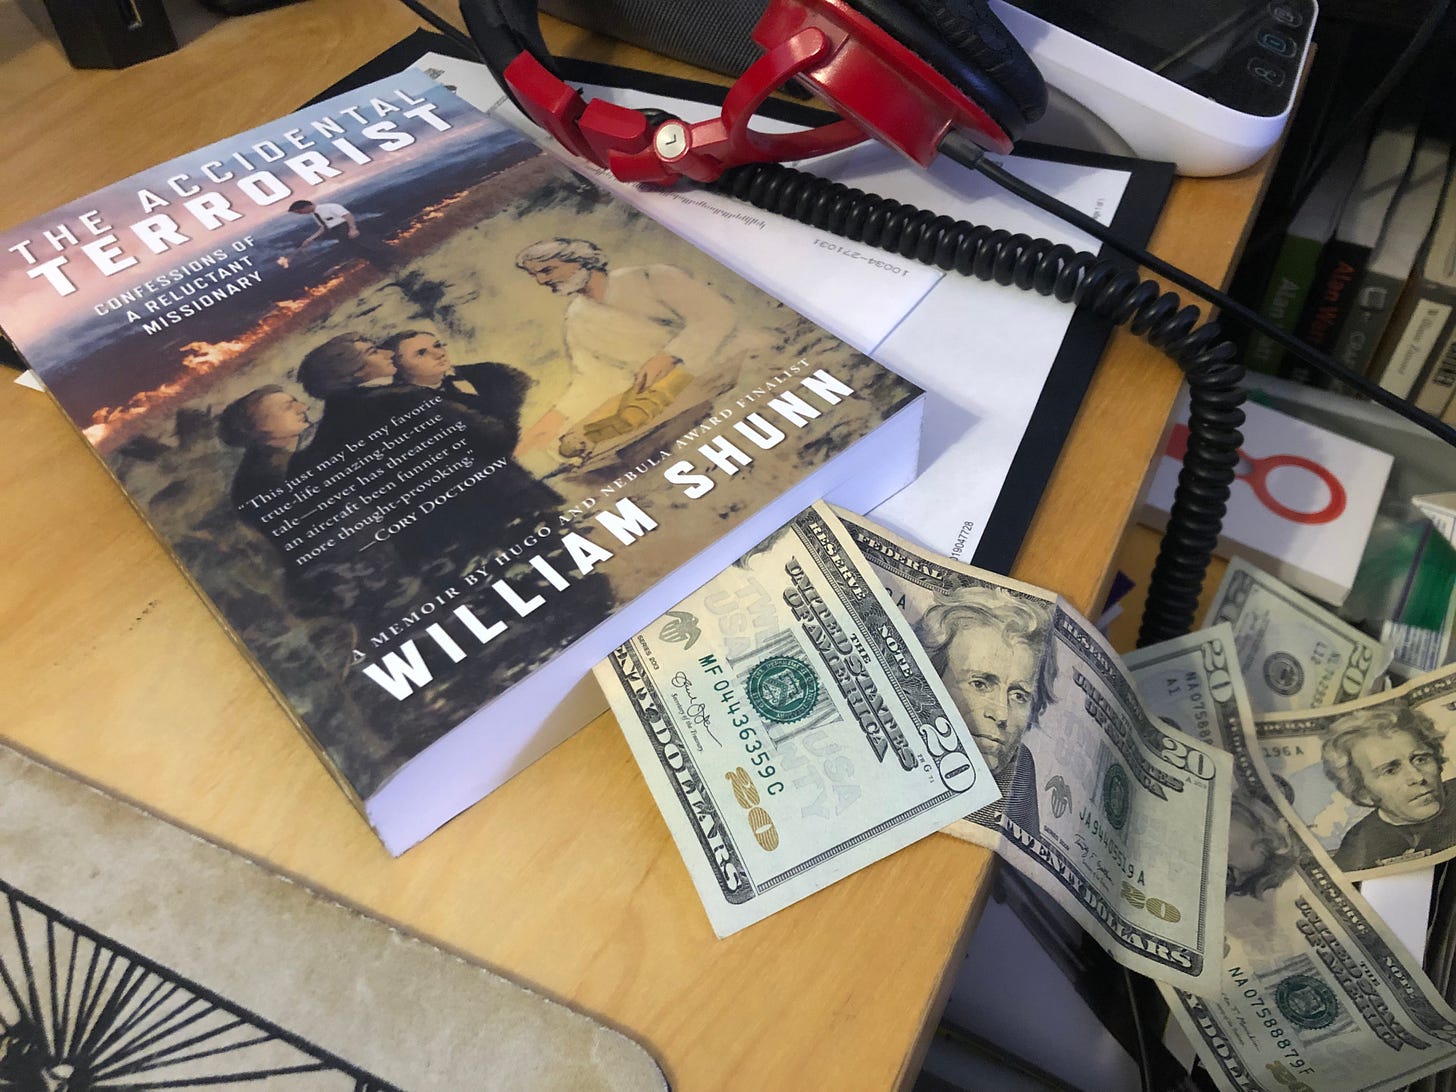 A copy of a paperback book, The Accidental Terrorist by William Shunn, lies on a cluttered desk with twenty-dollar bills spilling out of it.